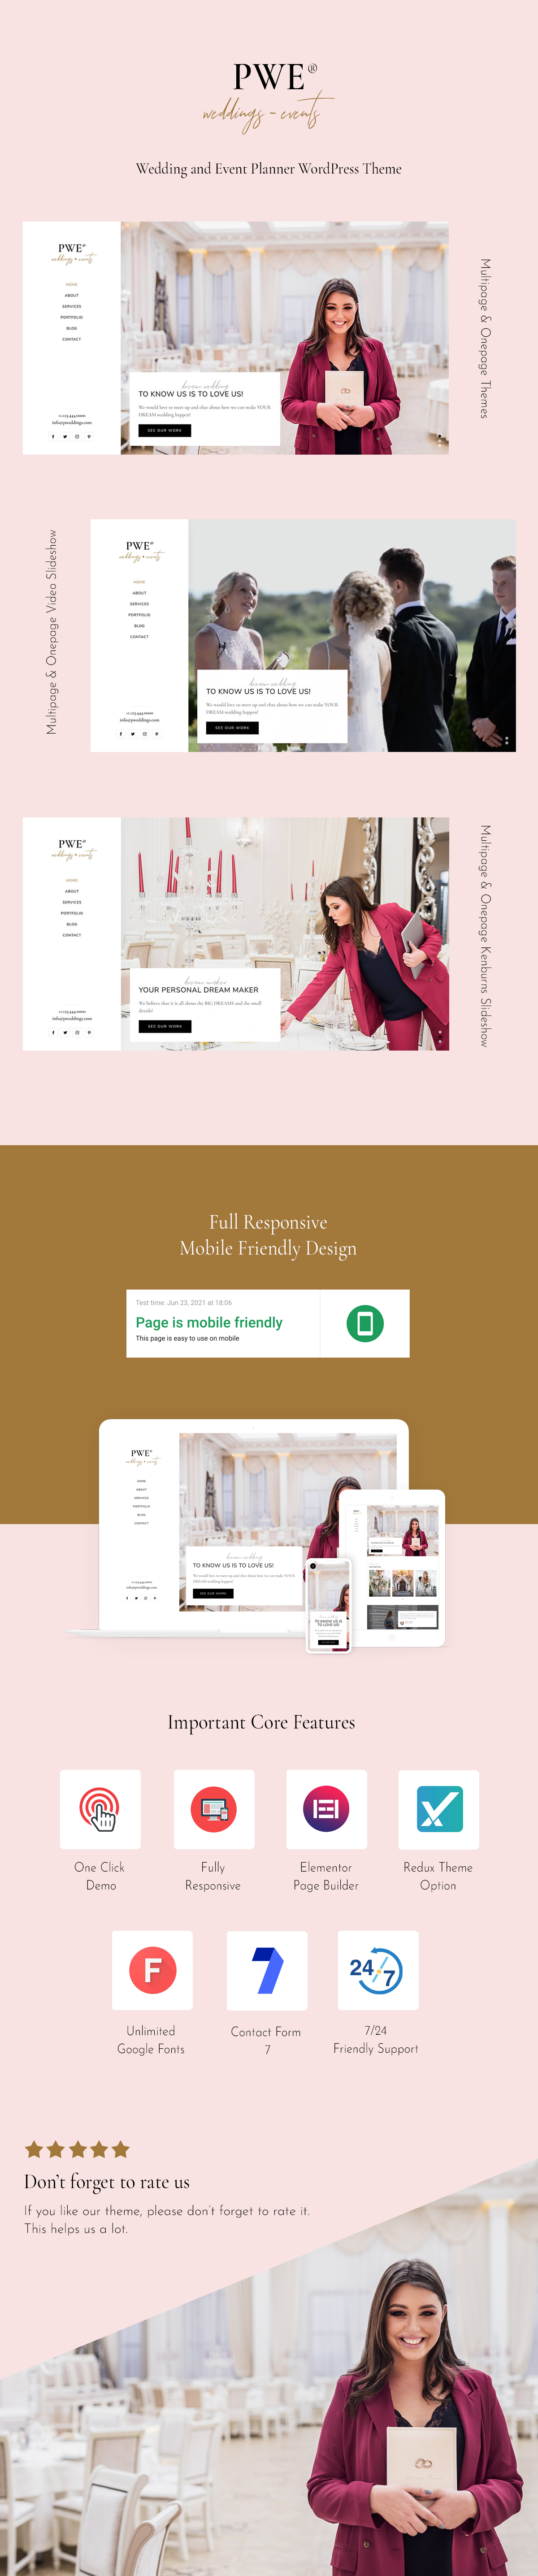 Pink background and website template pages.